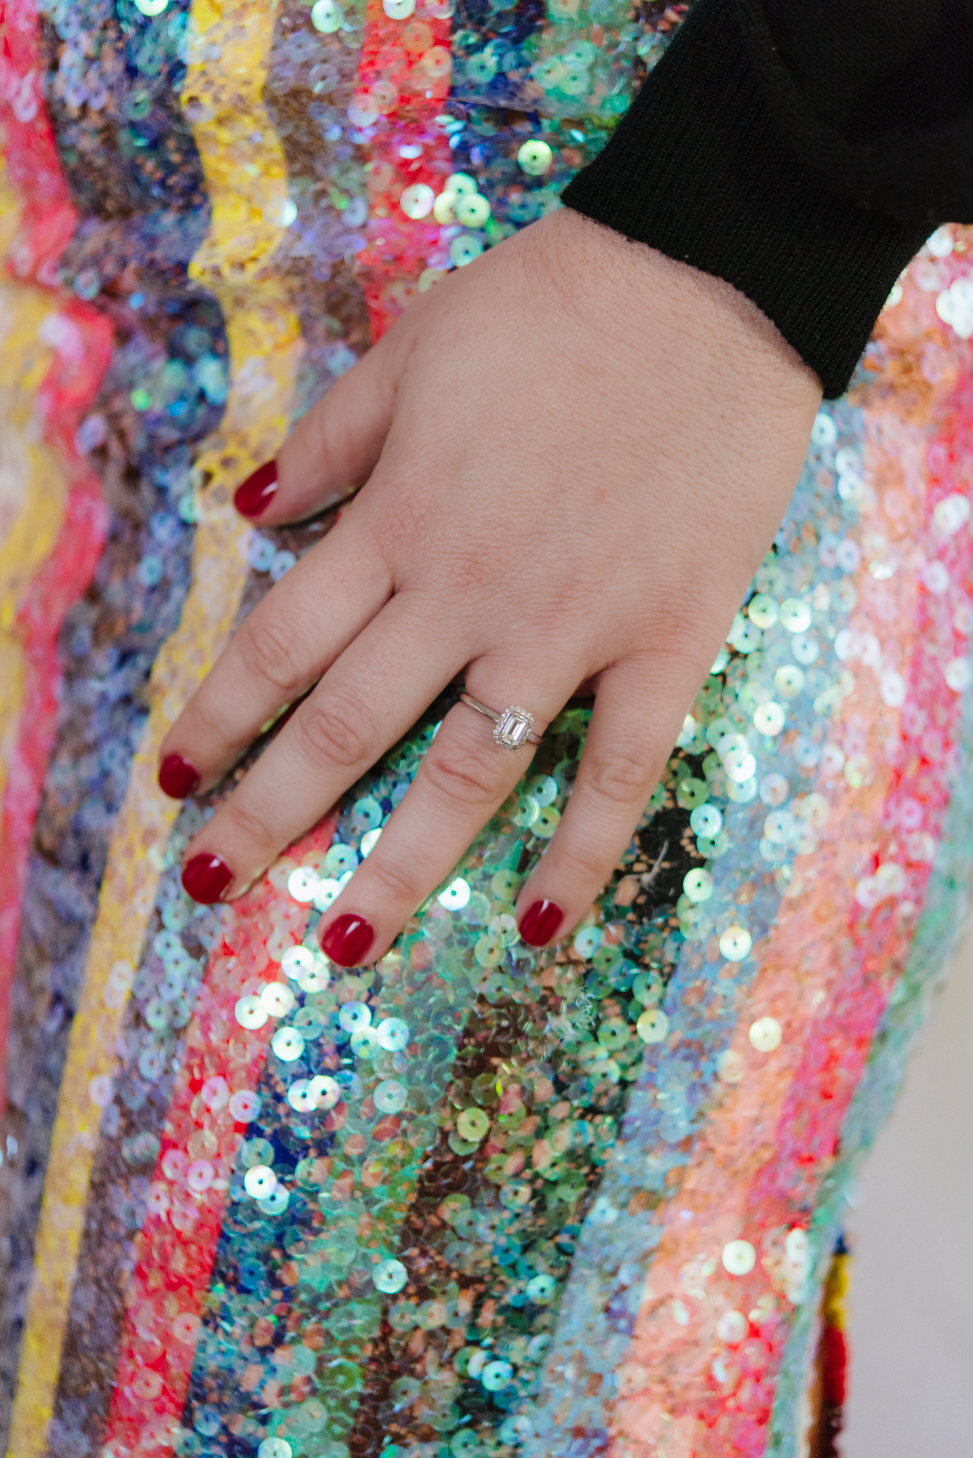 Walmart synthetic diamond engagement ring on a woman's hand resting on a rainbow sequined skirt